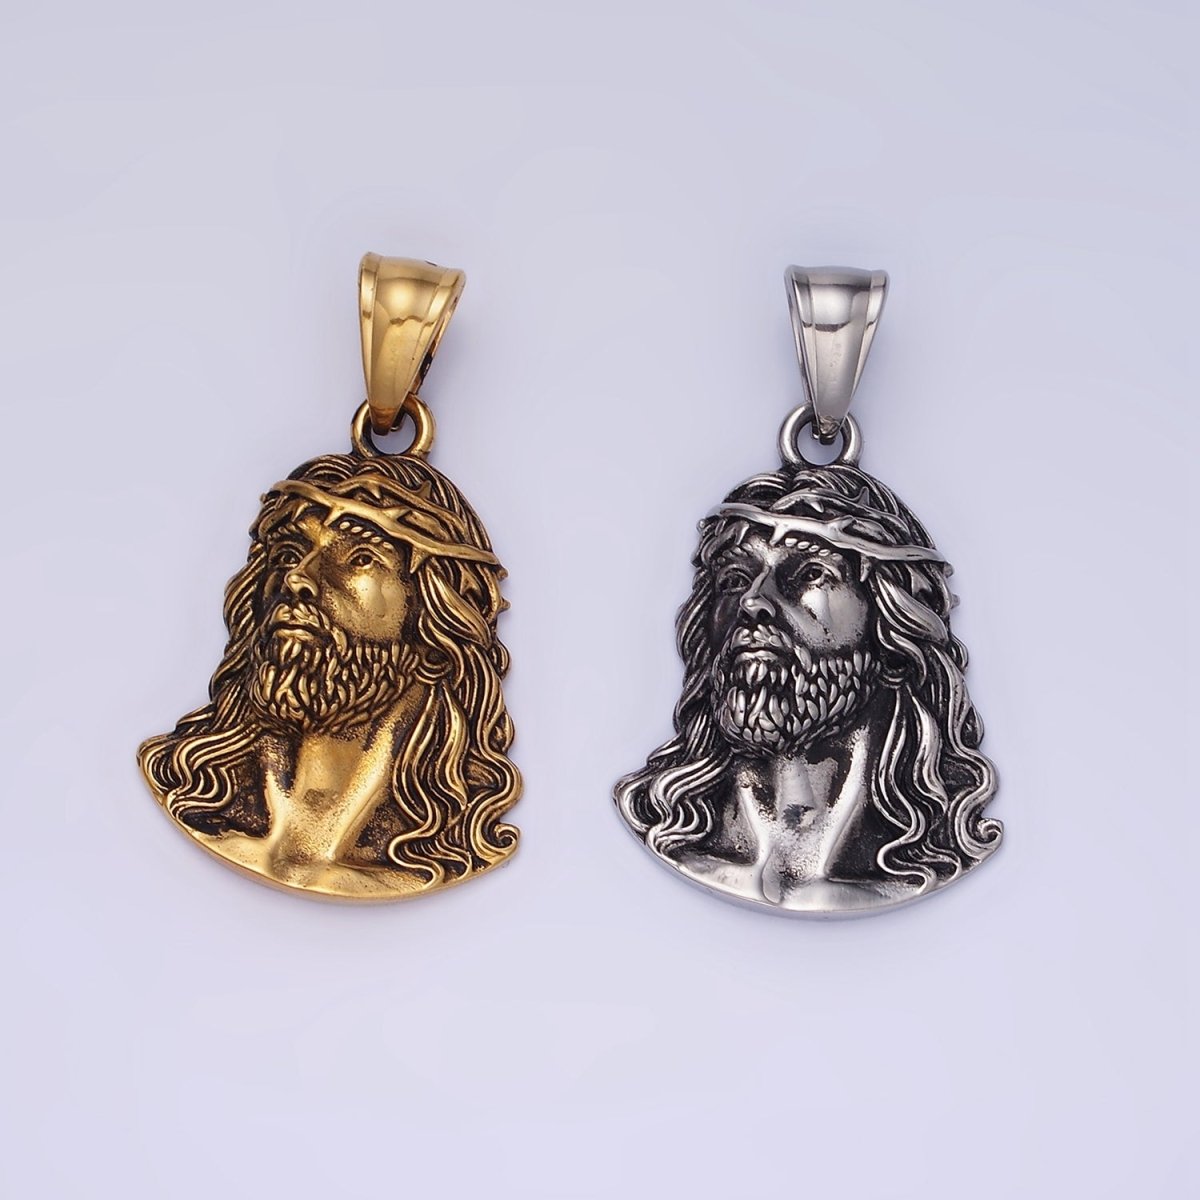 Stainless Steel Jesus Christ Religious Figure Pendant in Gold & Silver | P1213 P1214 - DLUXCA